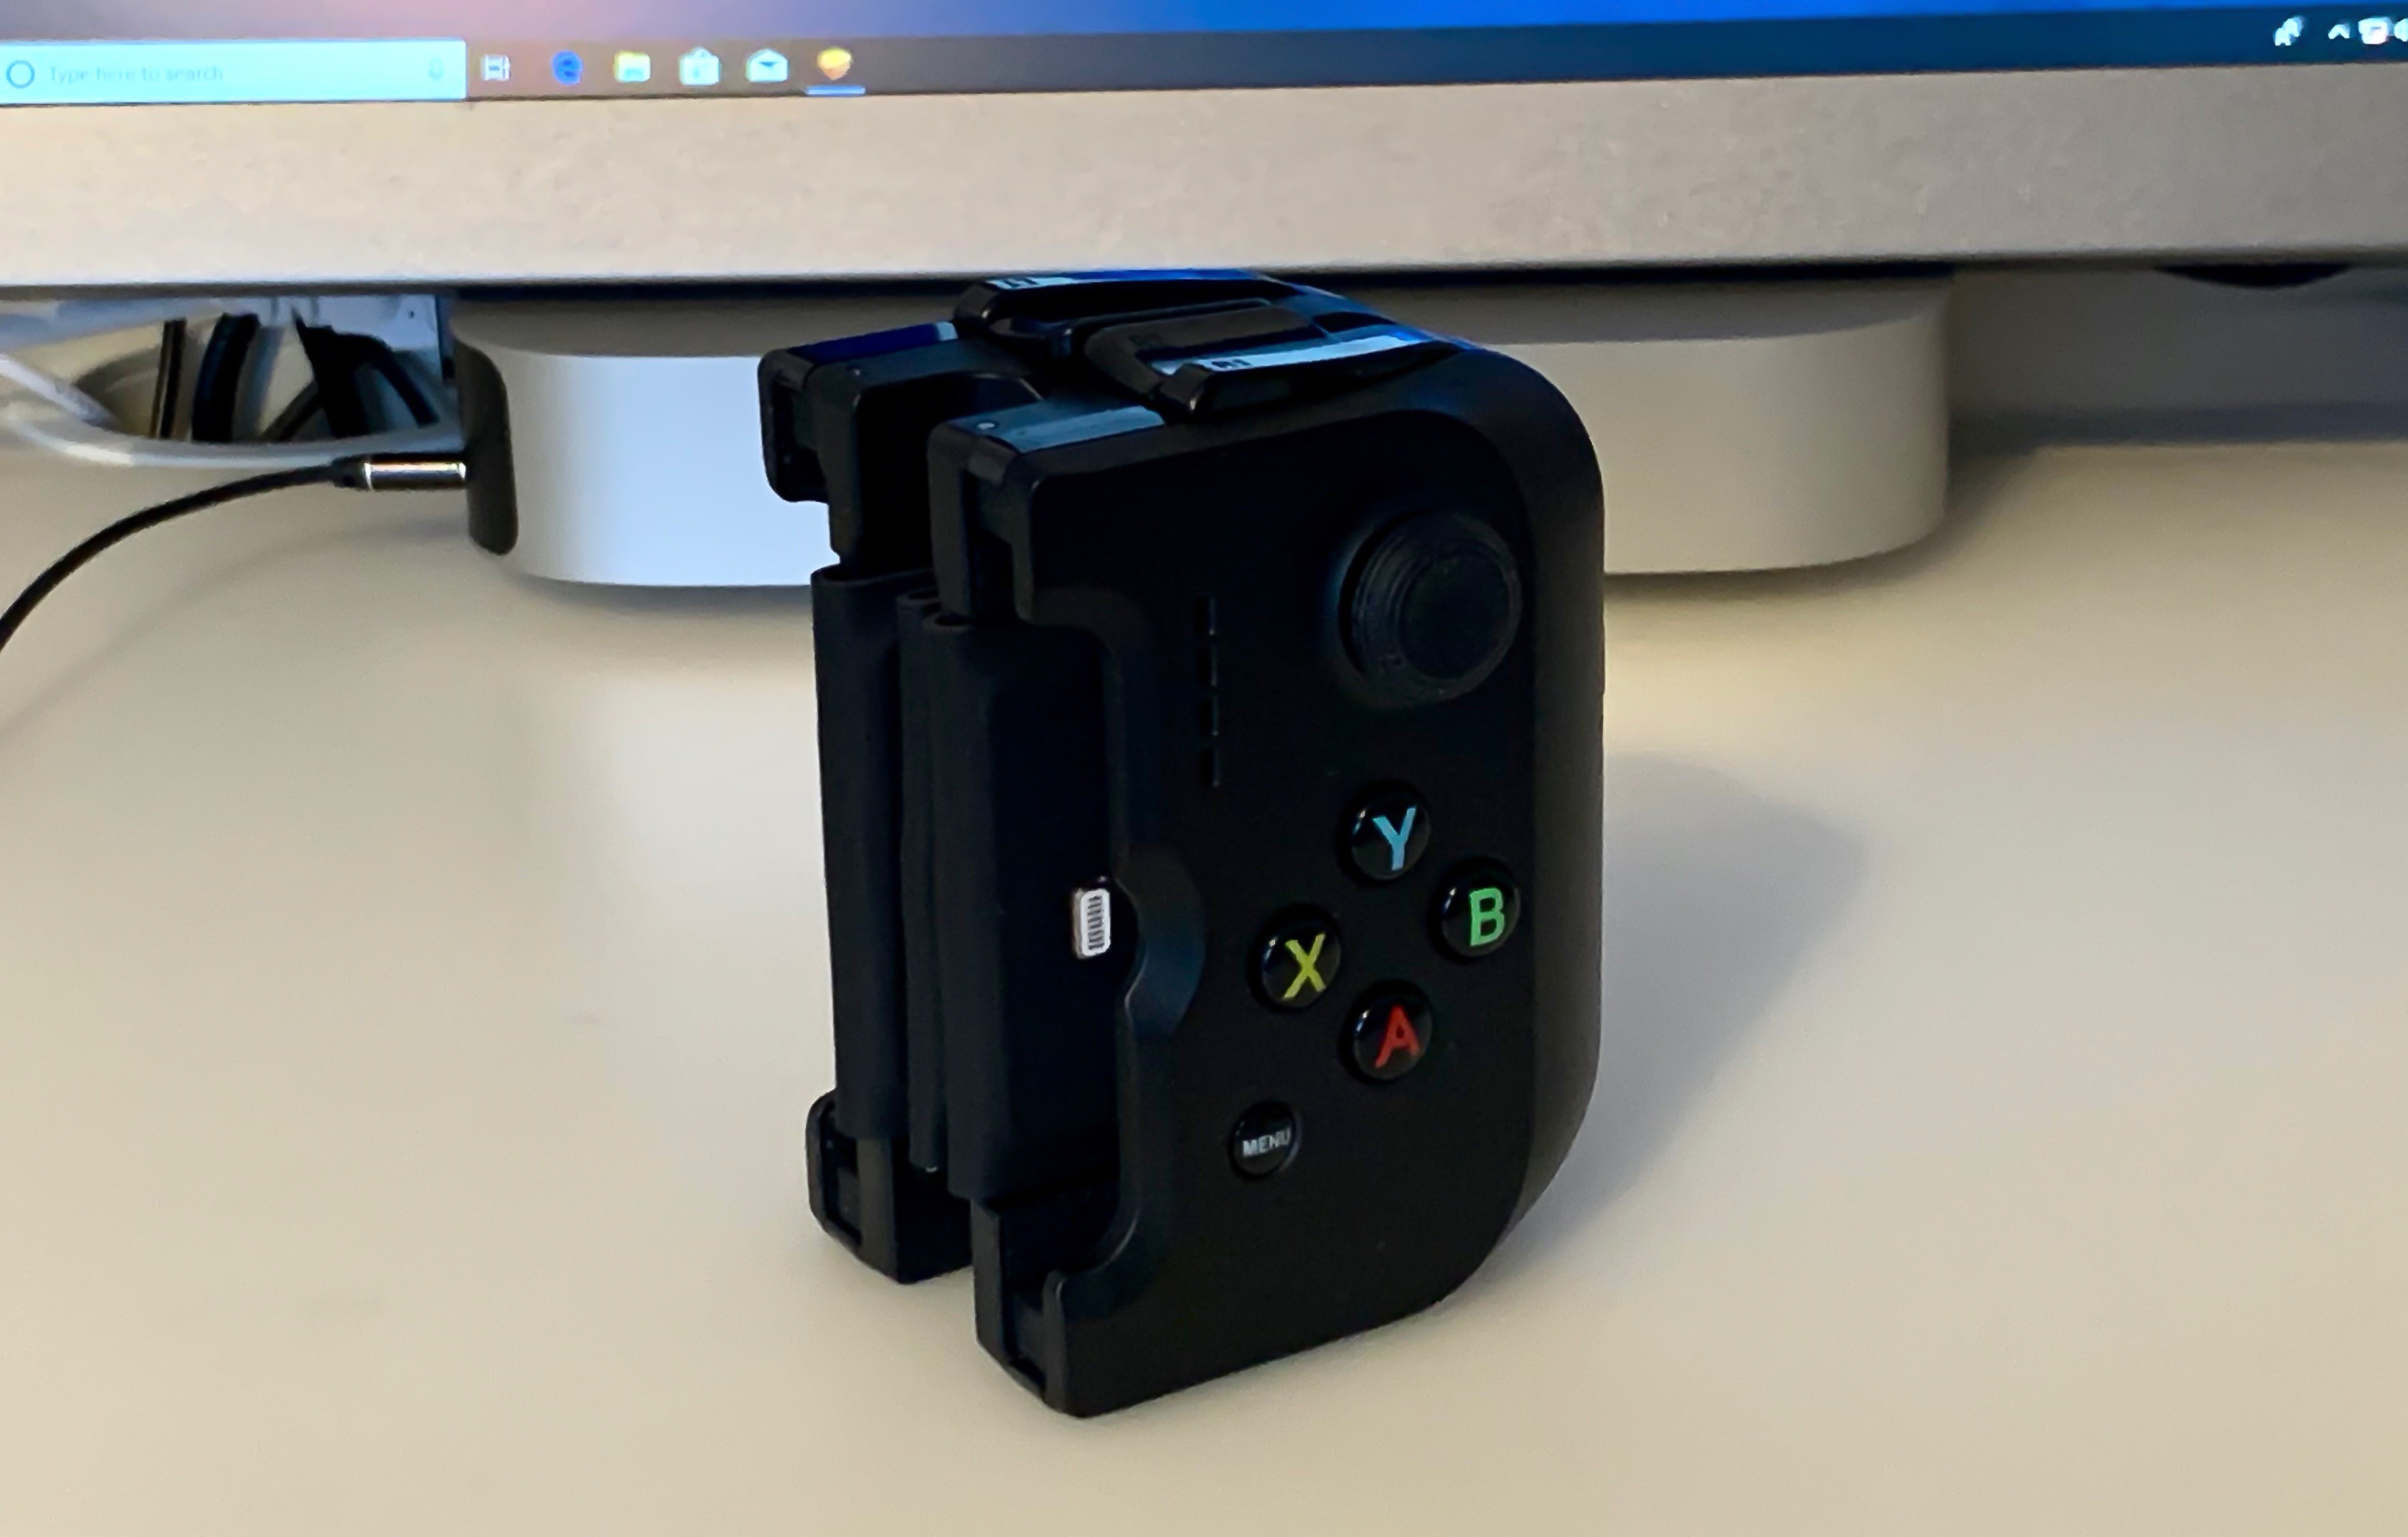 The Gamevice is even smaller when it's folded up